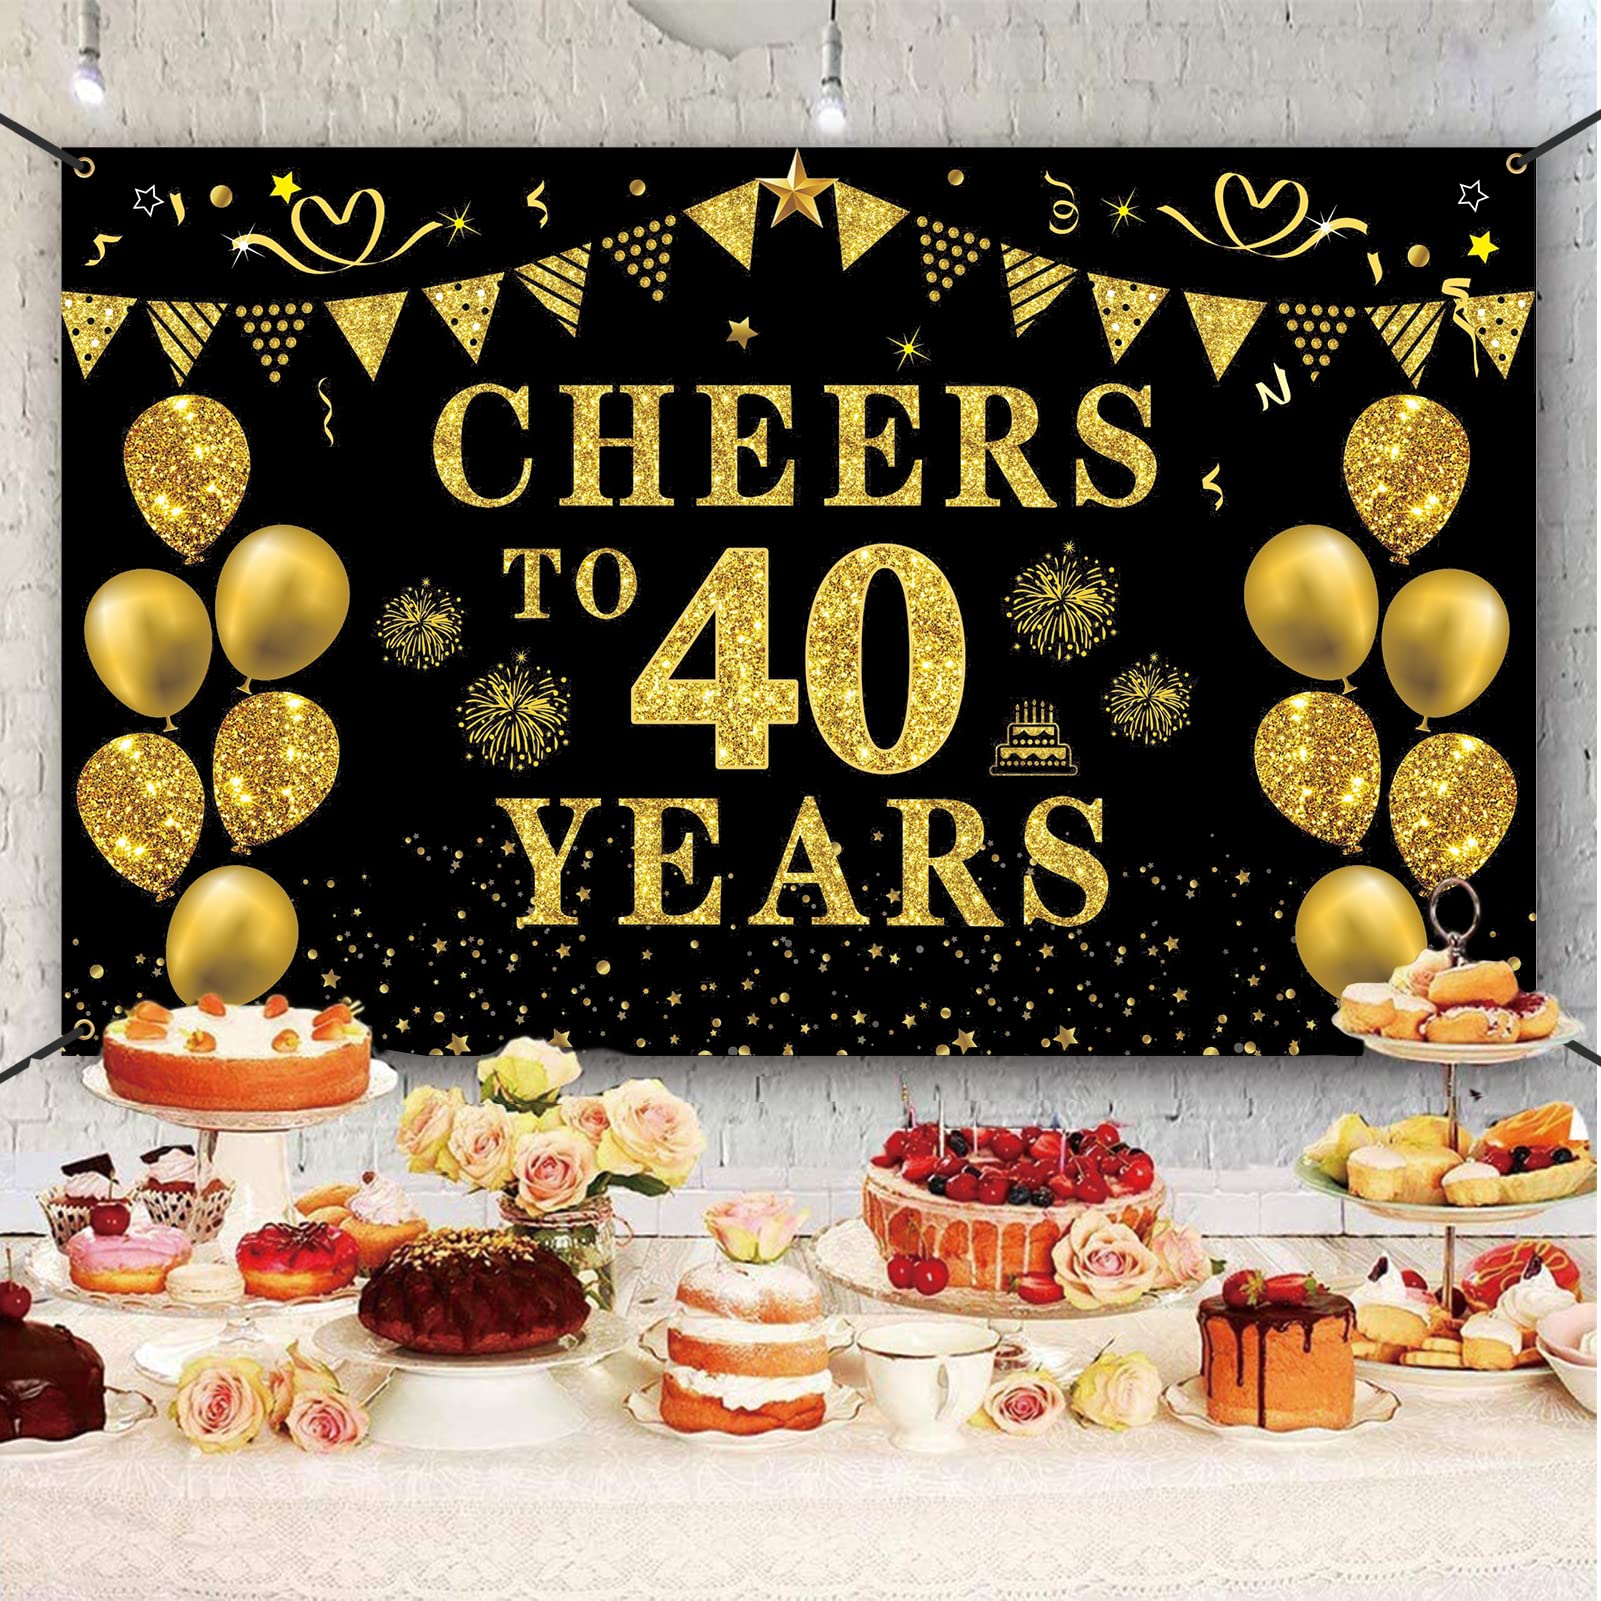 Trgowaul 40th Birthday Decorations for Women Men, Cheers to 40 Years Banner, Black and Gold 40th Birthday Backdrop, 40th Wedding Anniversary Decorations Party Banner Photography Supplies Background